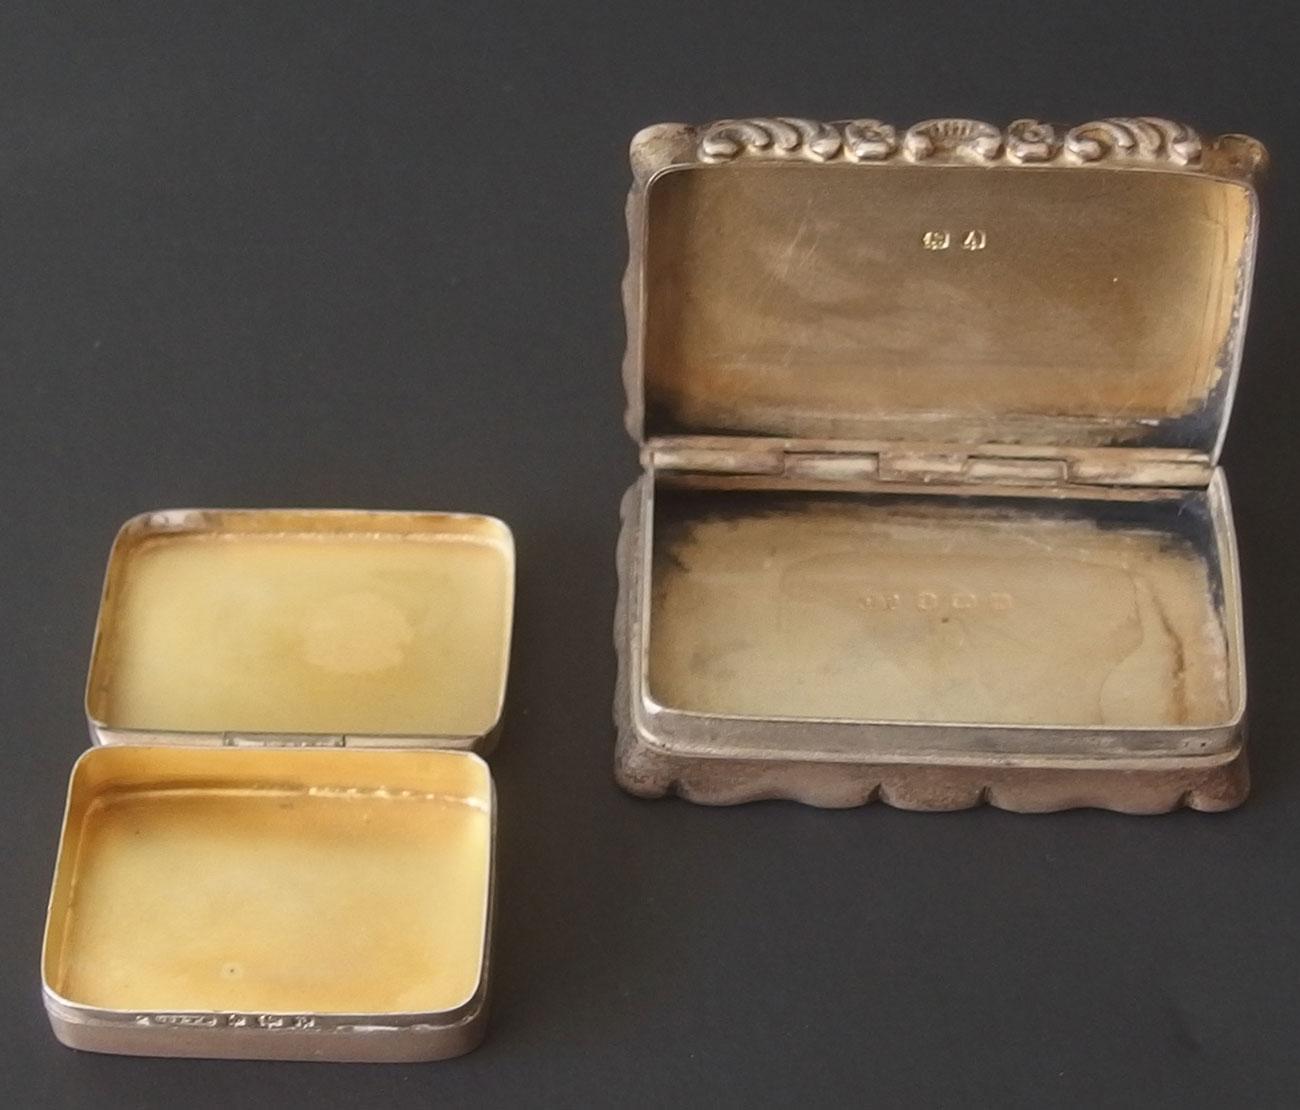 19TH CENTURY ENGLISH STERLING SNUFF BOXES (2)